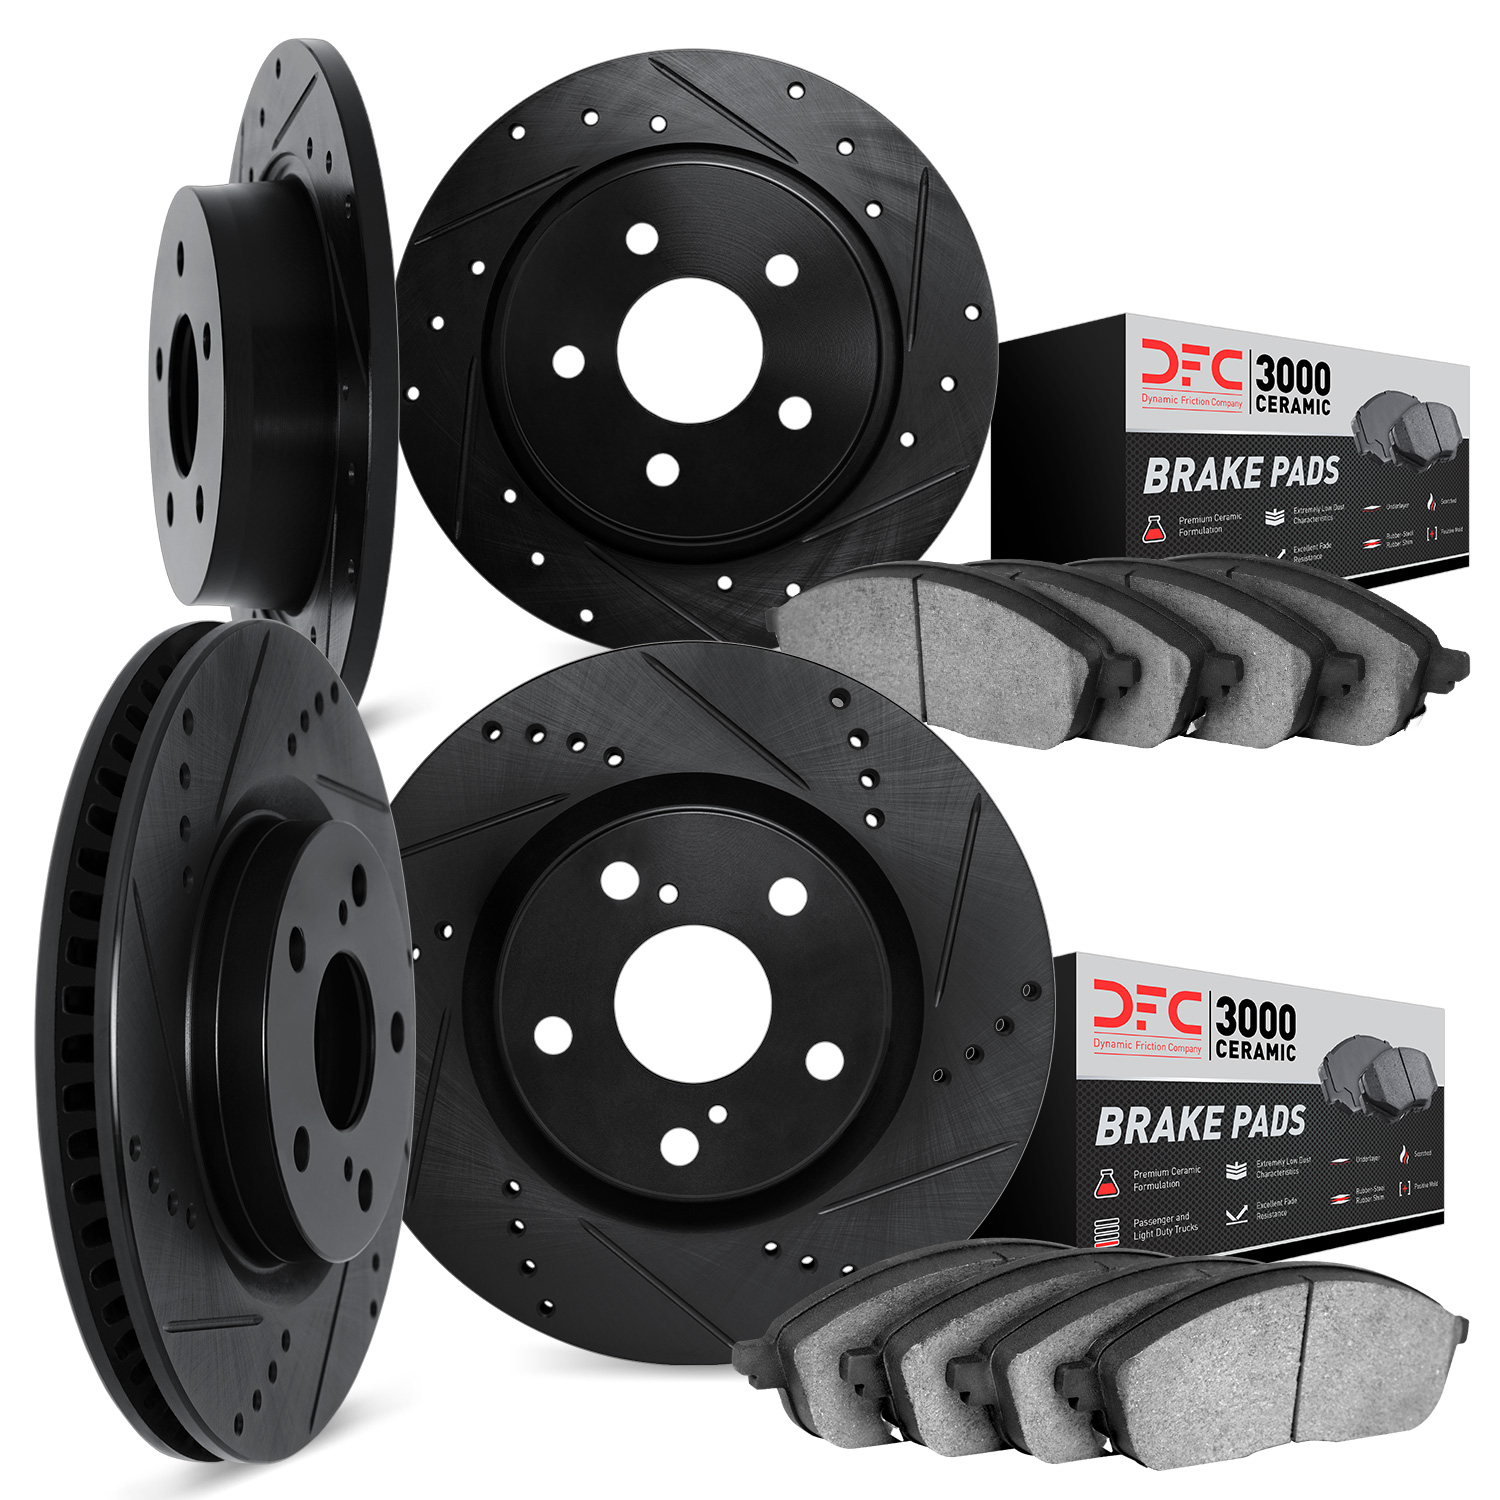 8304-72020 Drilled/Slotted Brake Rotors with 3000-Series Ceramic Brake Pads Kit [Black], 2009-2015 Mitsubishi, Position: Front a